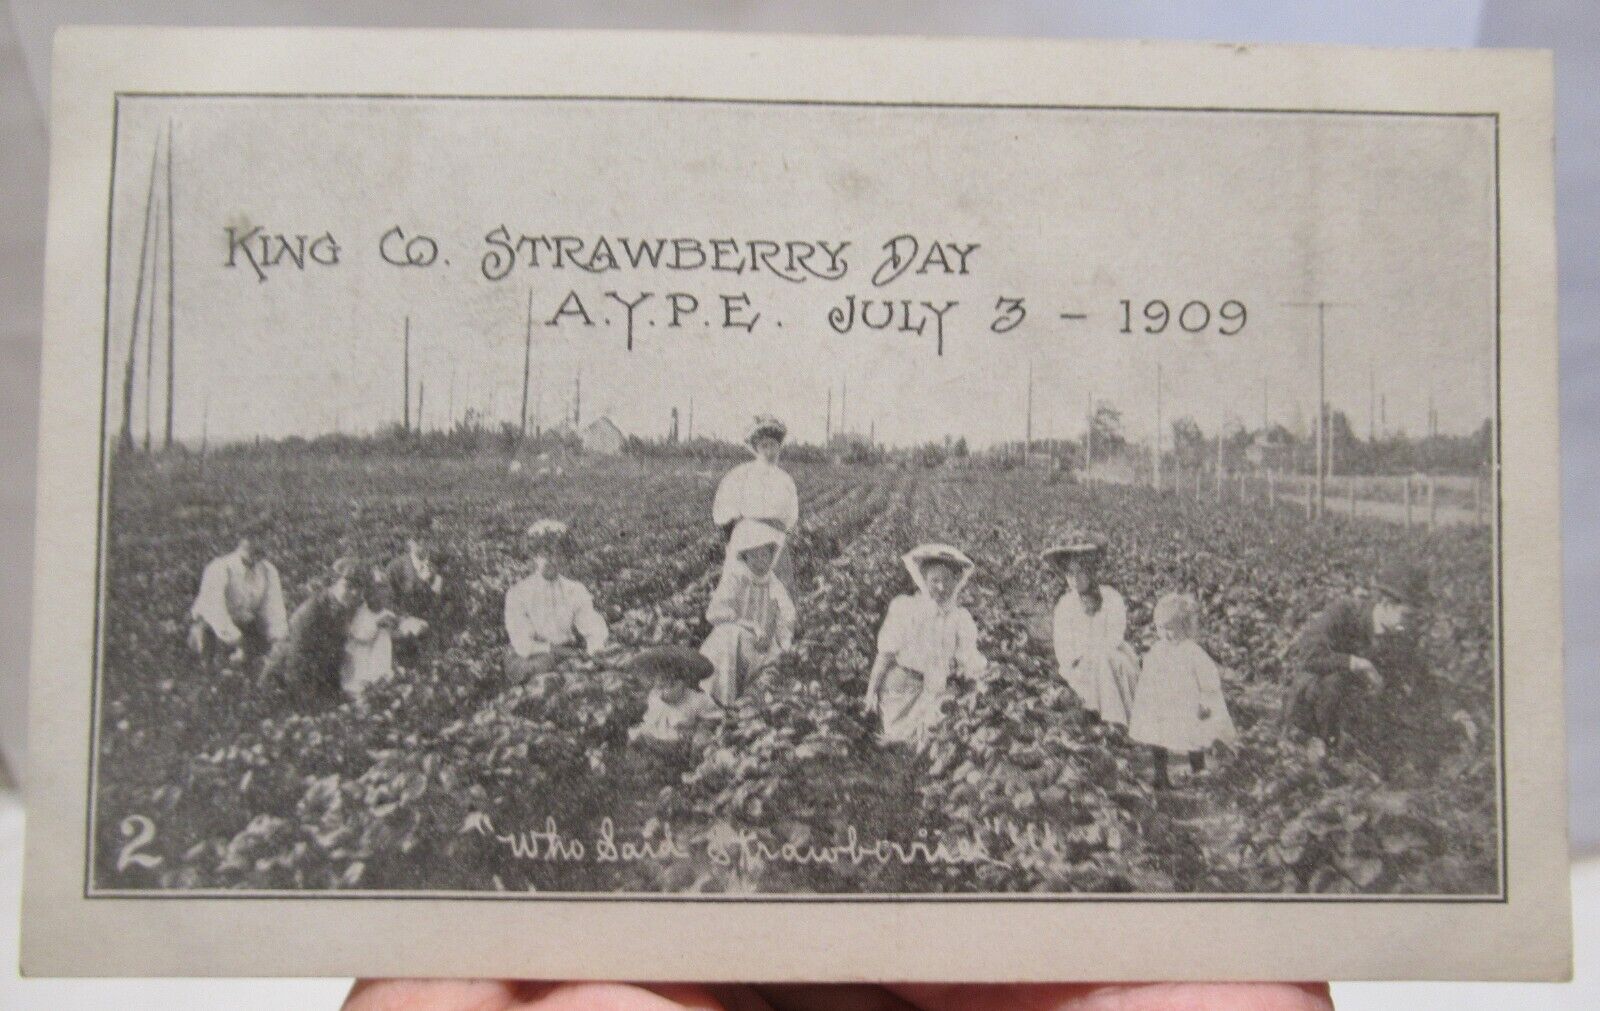 1909 - KING CO. STRAWBERRY DAY - vintage POSTCARD - POST CARD - #1847